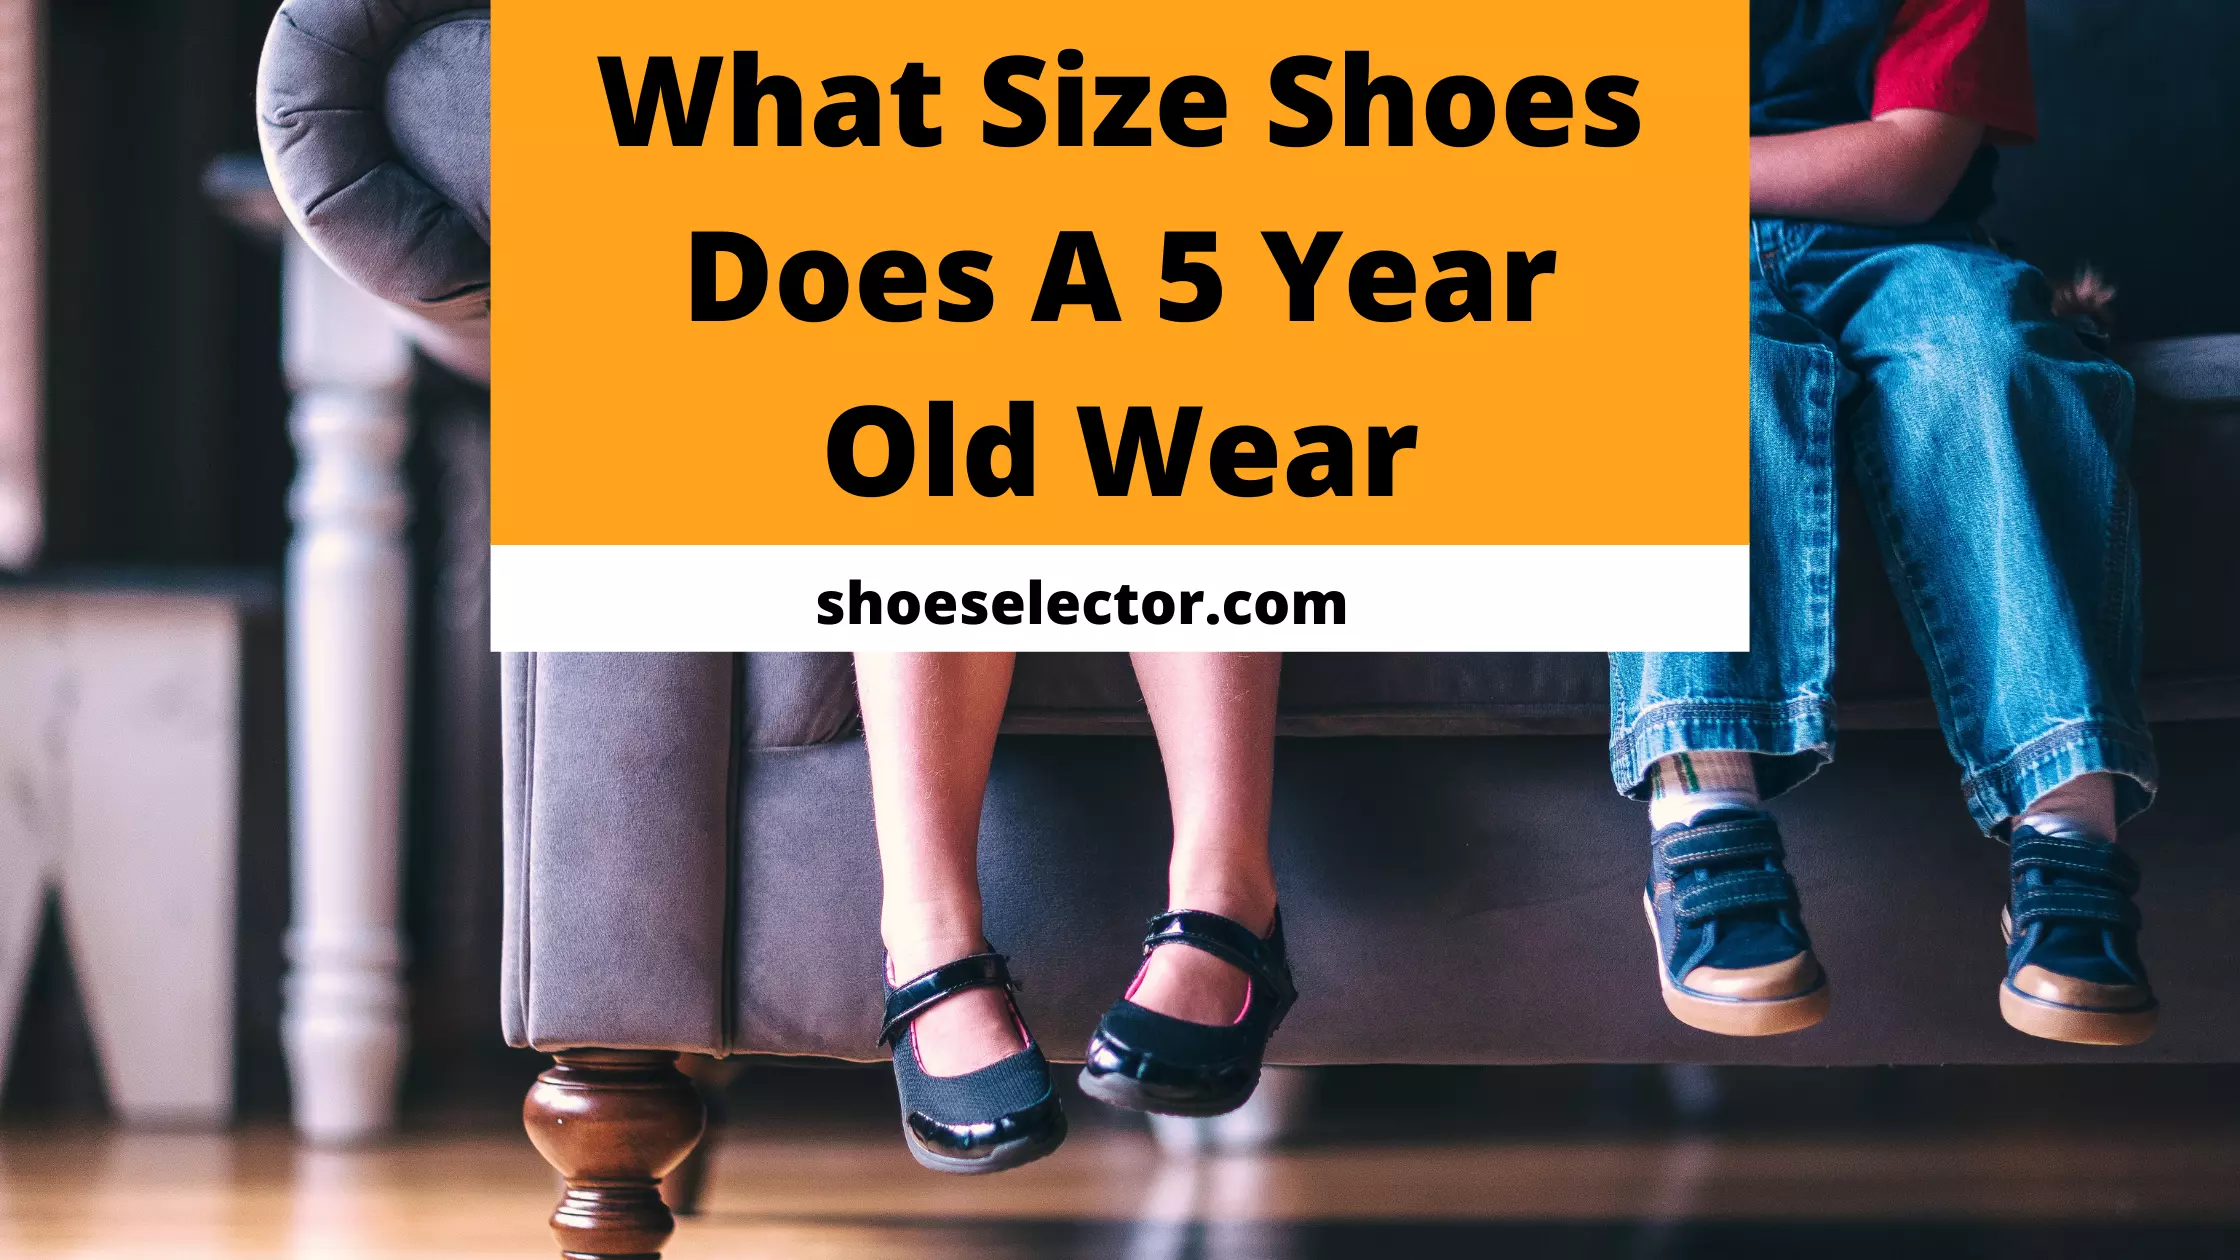 What Size Shoe Does a 5 Year Old Wear